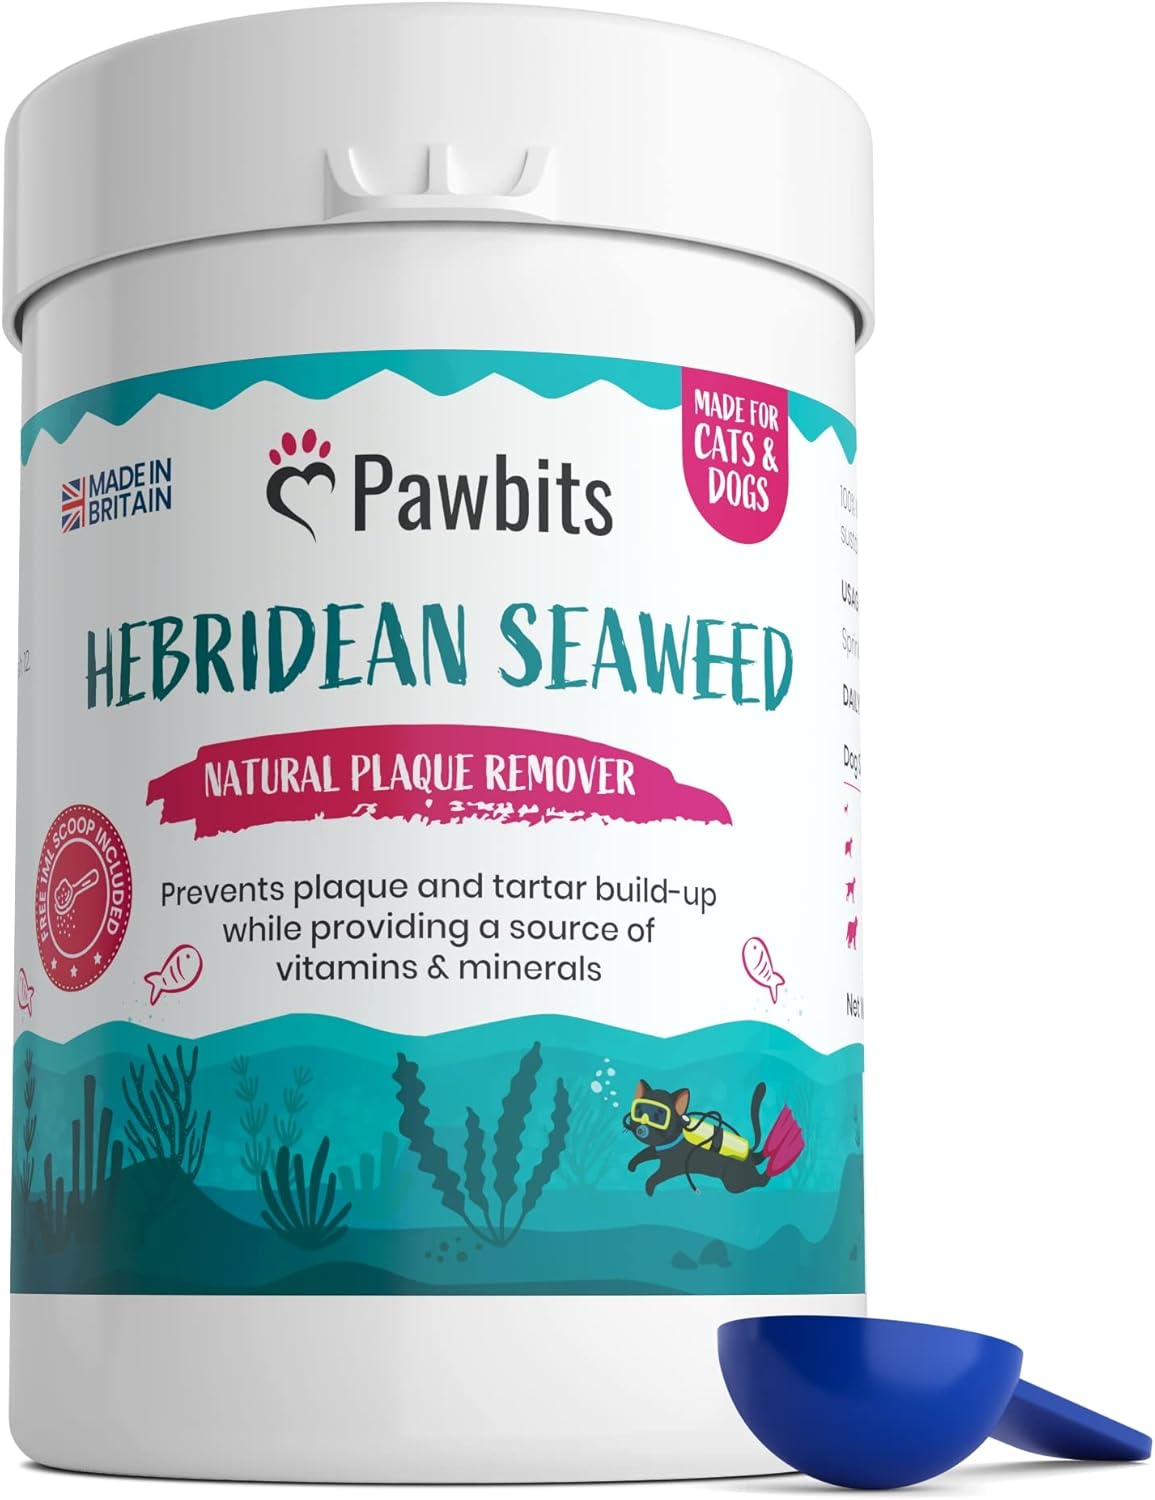 Pawbits 100% Seaweed for Dogs Teeth - Sustainably Harvested Natural Tartar & Plaque Removing Flakes with Vitamins & Minerals to Combat Bad Breath Suitable For Cats